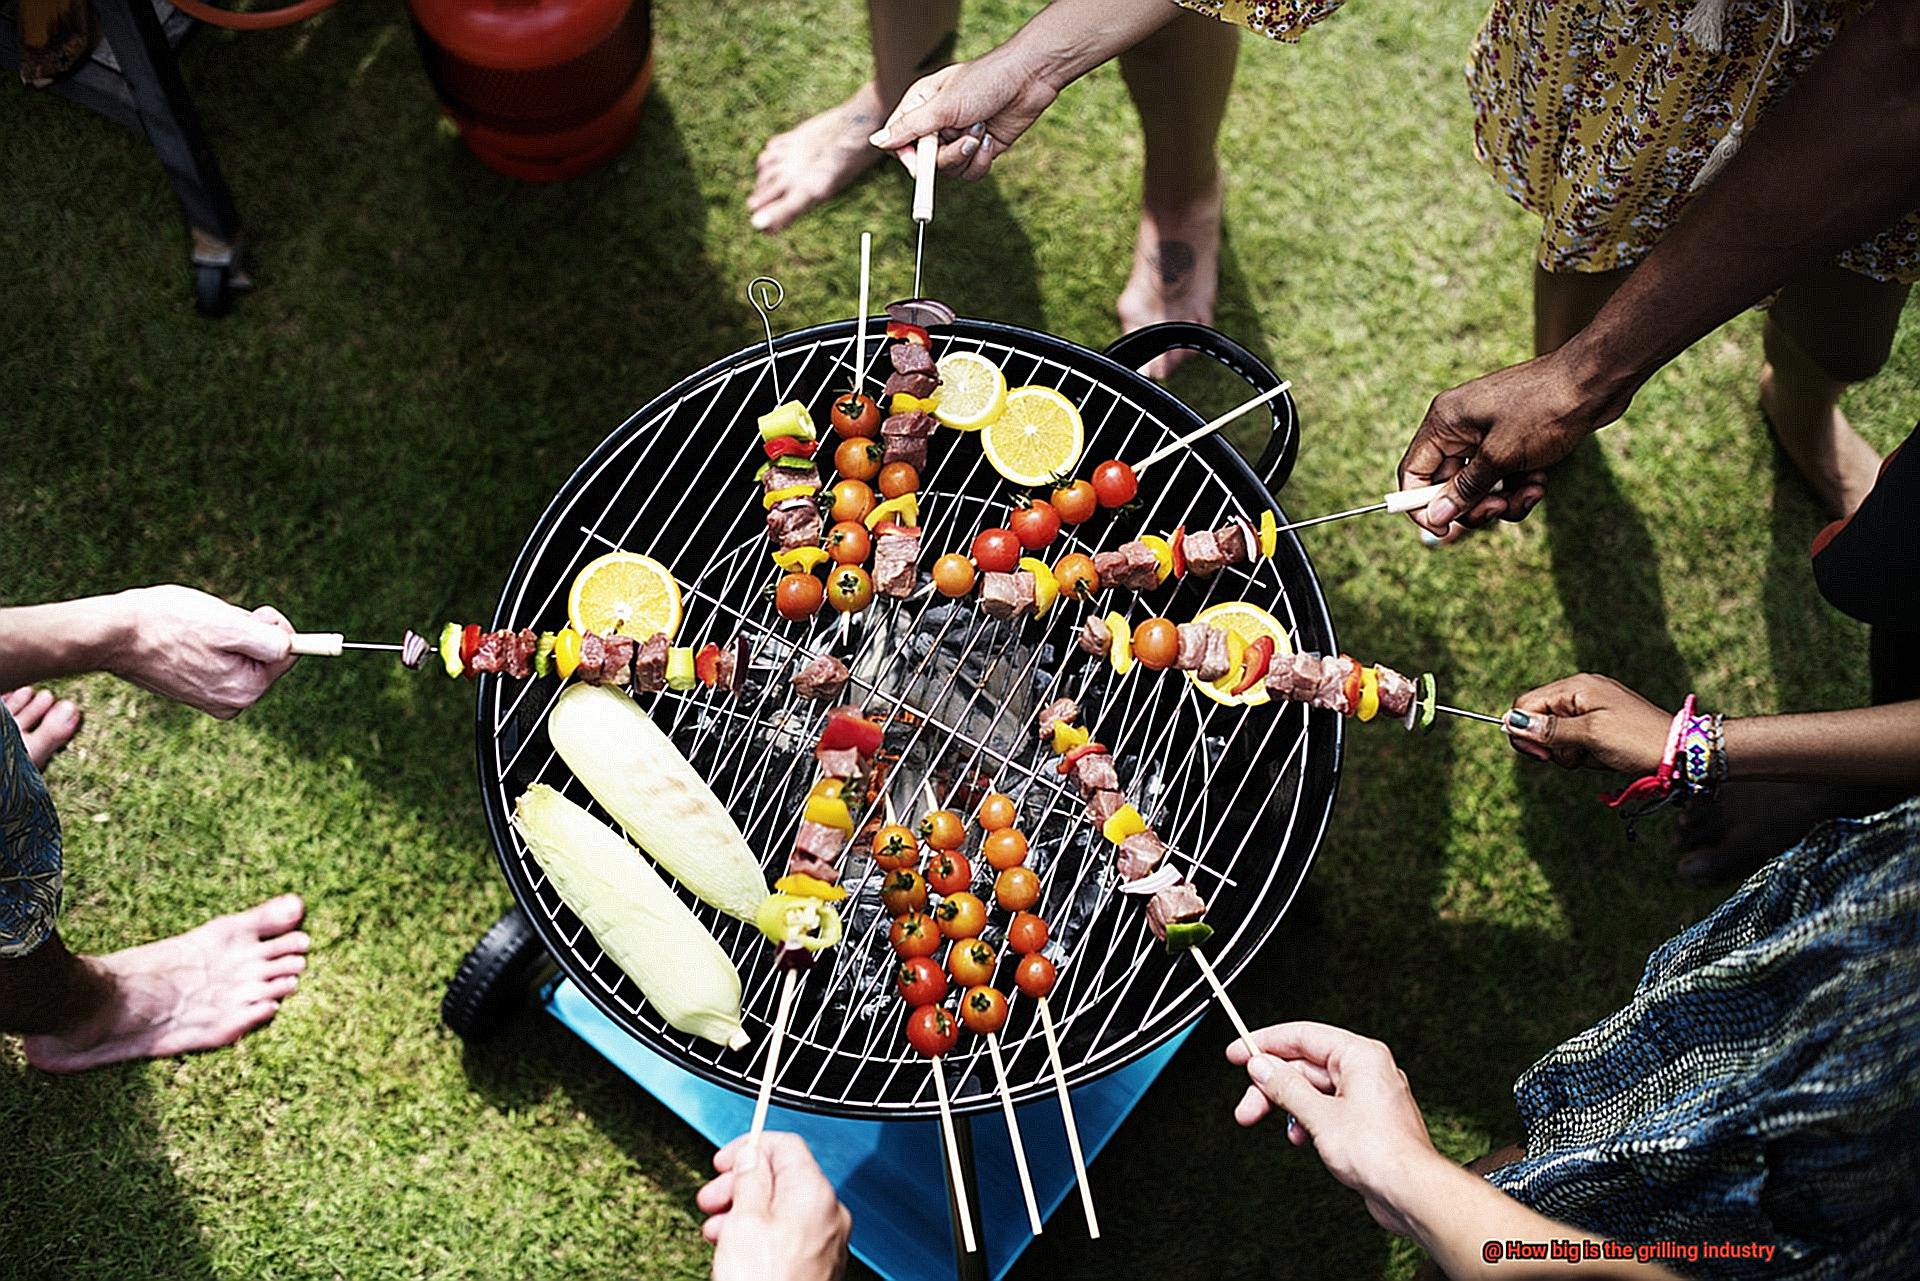 How big is the grilling industry-2